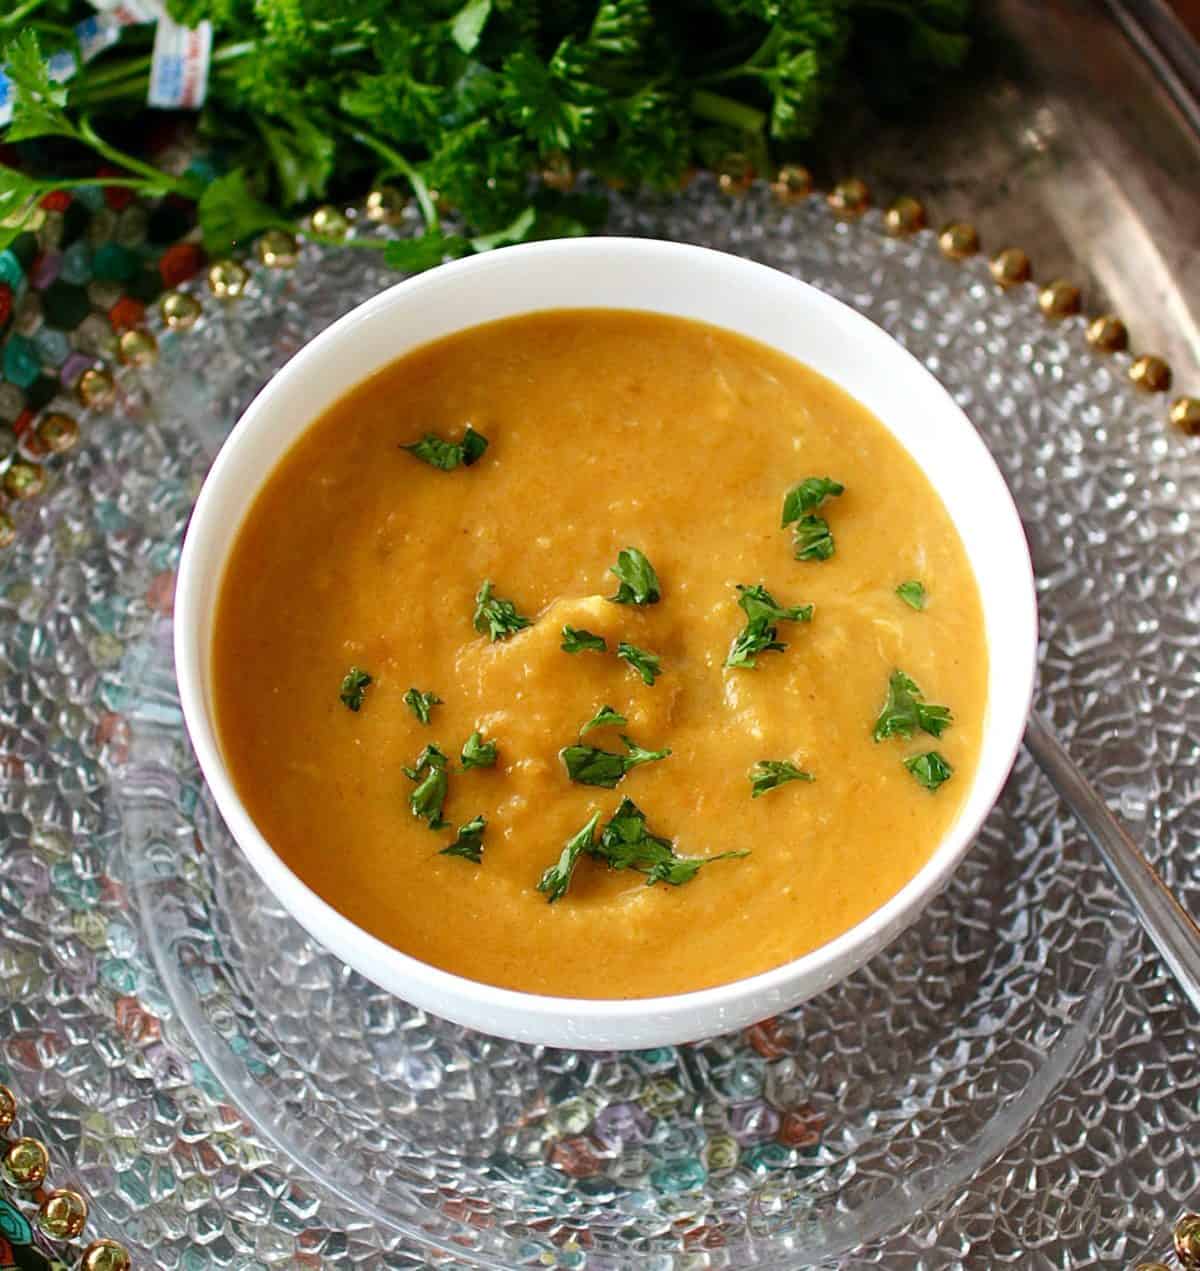 an overnight picture of a bowl of golden colored butternut squash soup topped with chopped parsley.